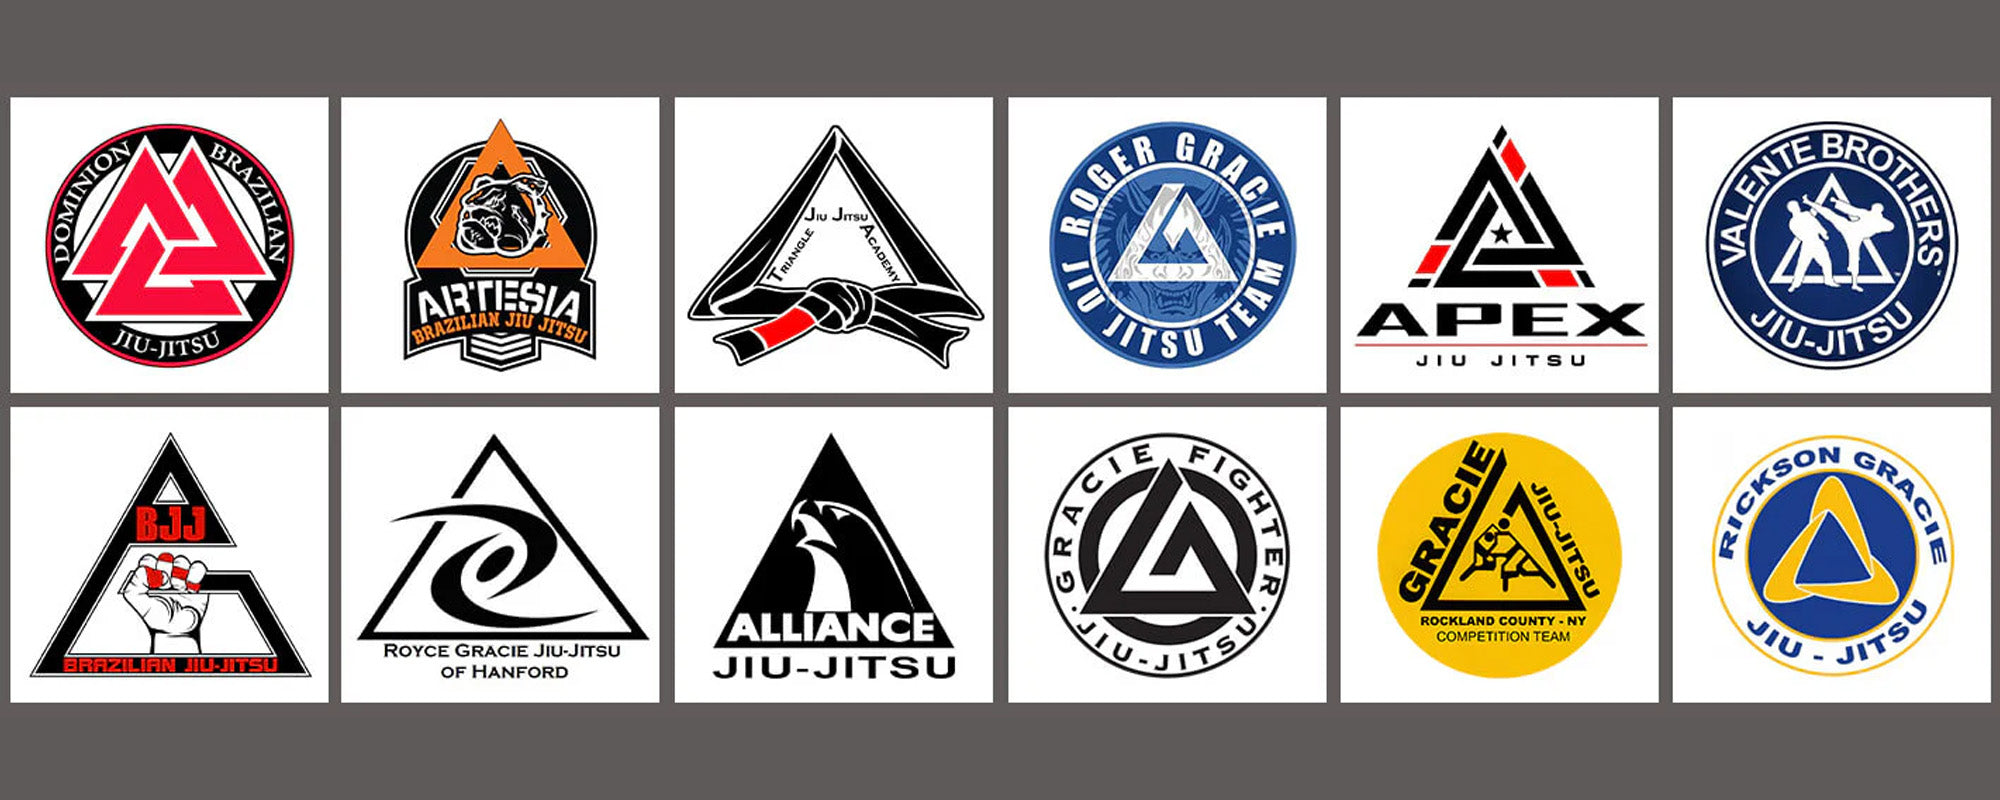 Why is The Triangle Used As A Symbol & Logo In BJJ